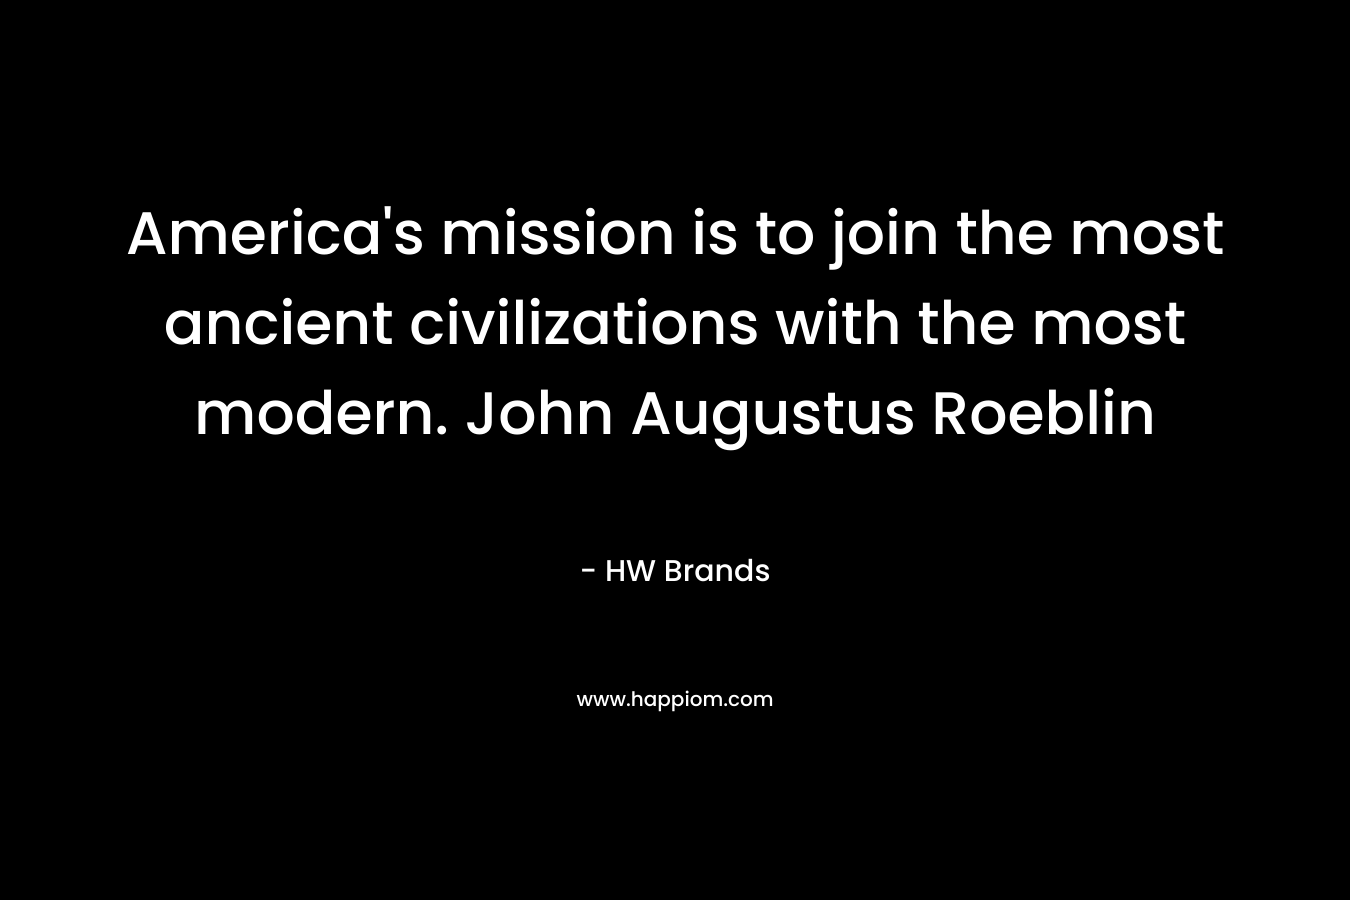 America's mission is to join the most ancient civilizations with the most modern. John Augustus Roeblin